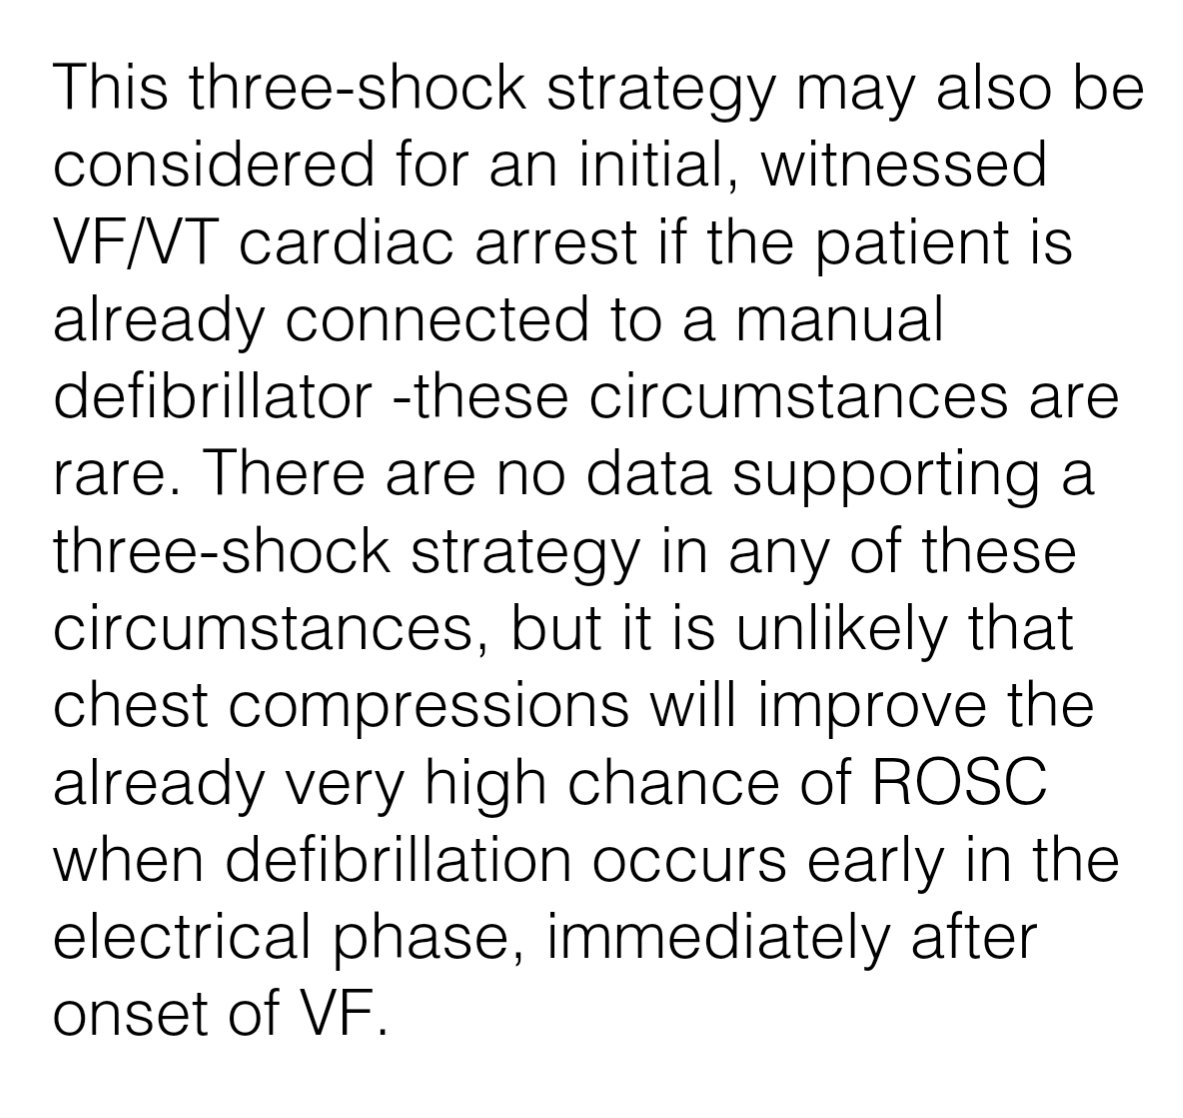 Wut.
Stacked shocks for VF/VT are back?!
resus.org.uk/library/2021-r…
@Aidan_Baron @DCollingsHughes